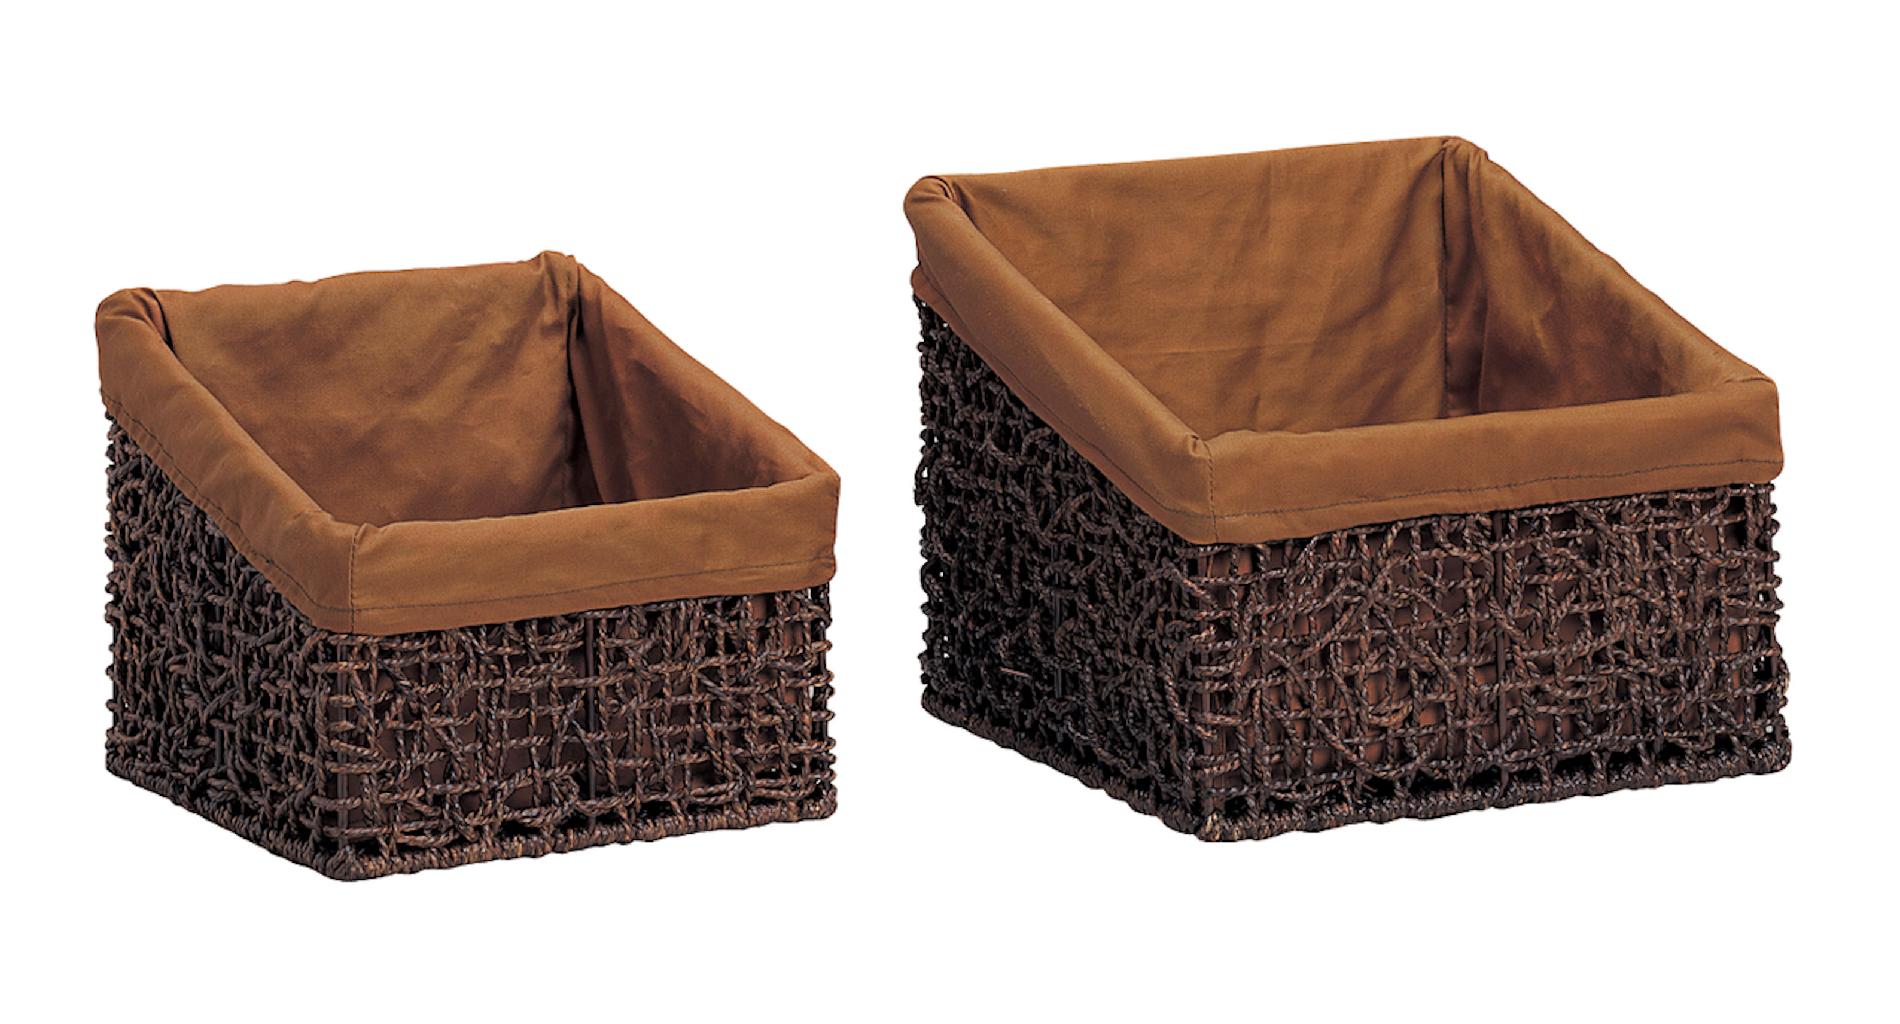 Neu Home Slant Baskets in Rustic Brown Stain (Set of 2)